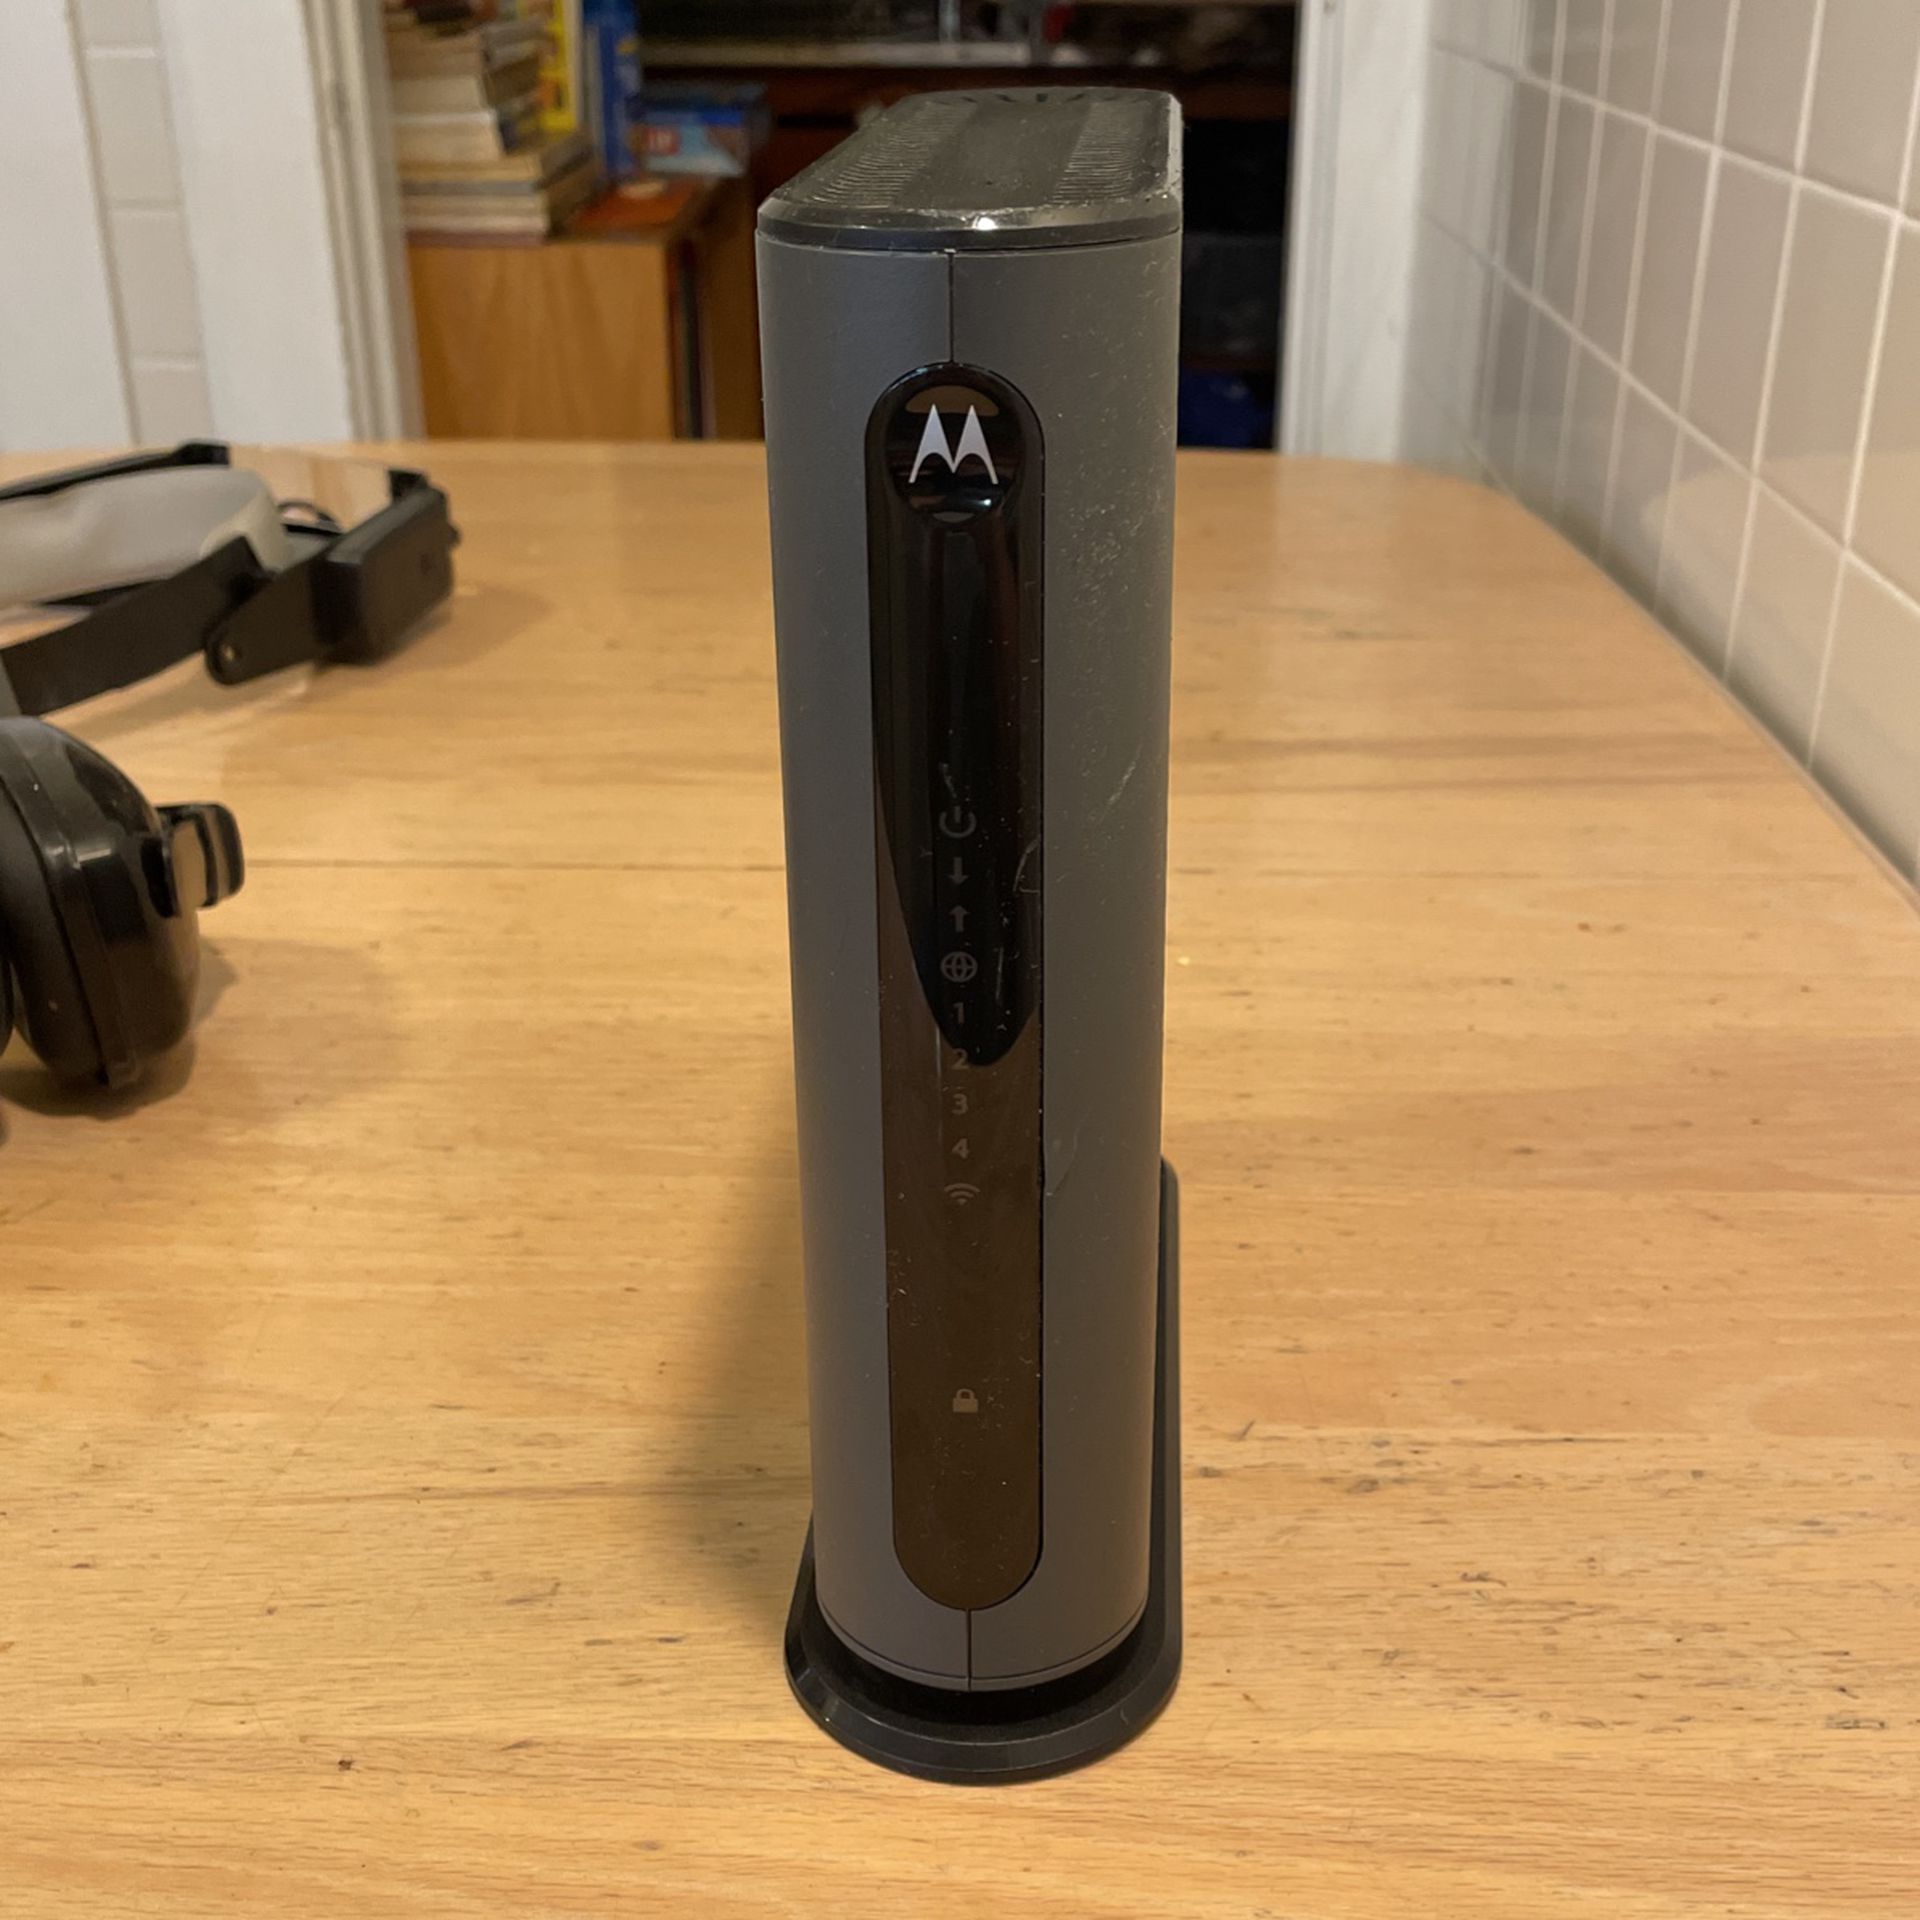 Motorola MG7310 Docsis 3.0 Cable Modem With Router